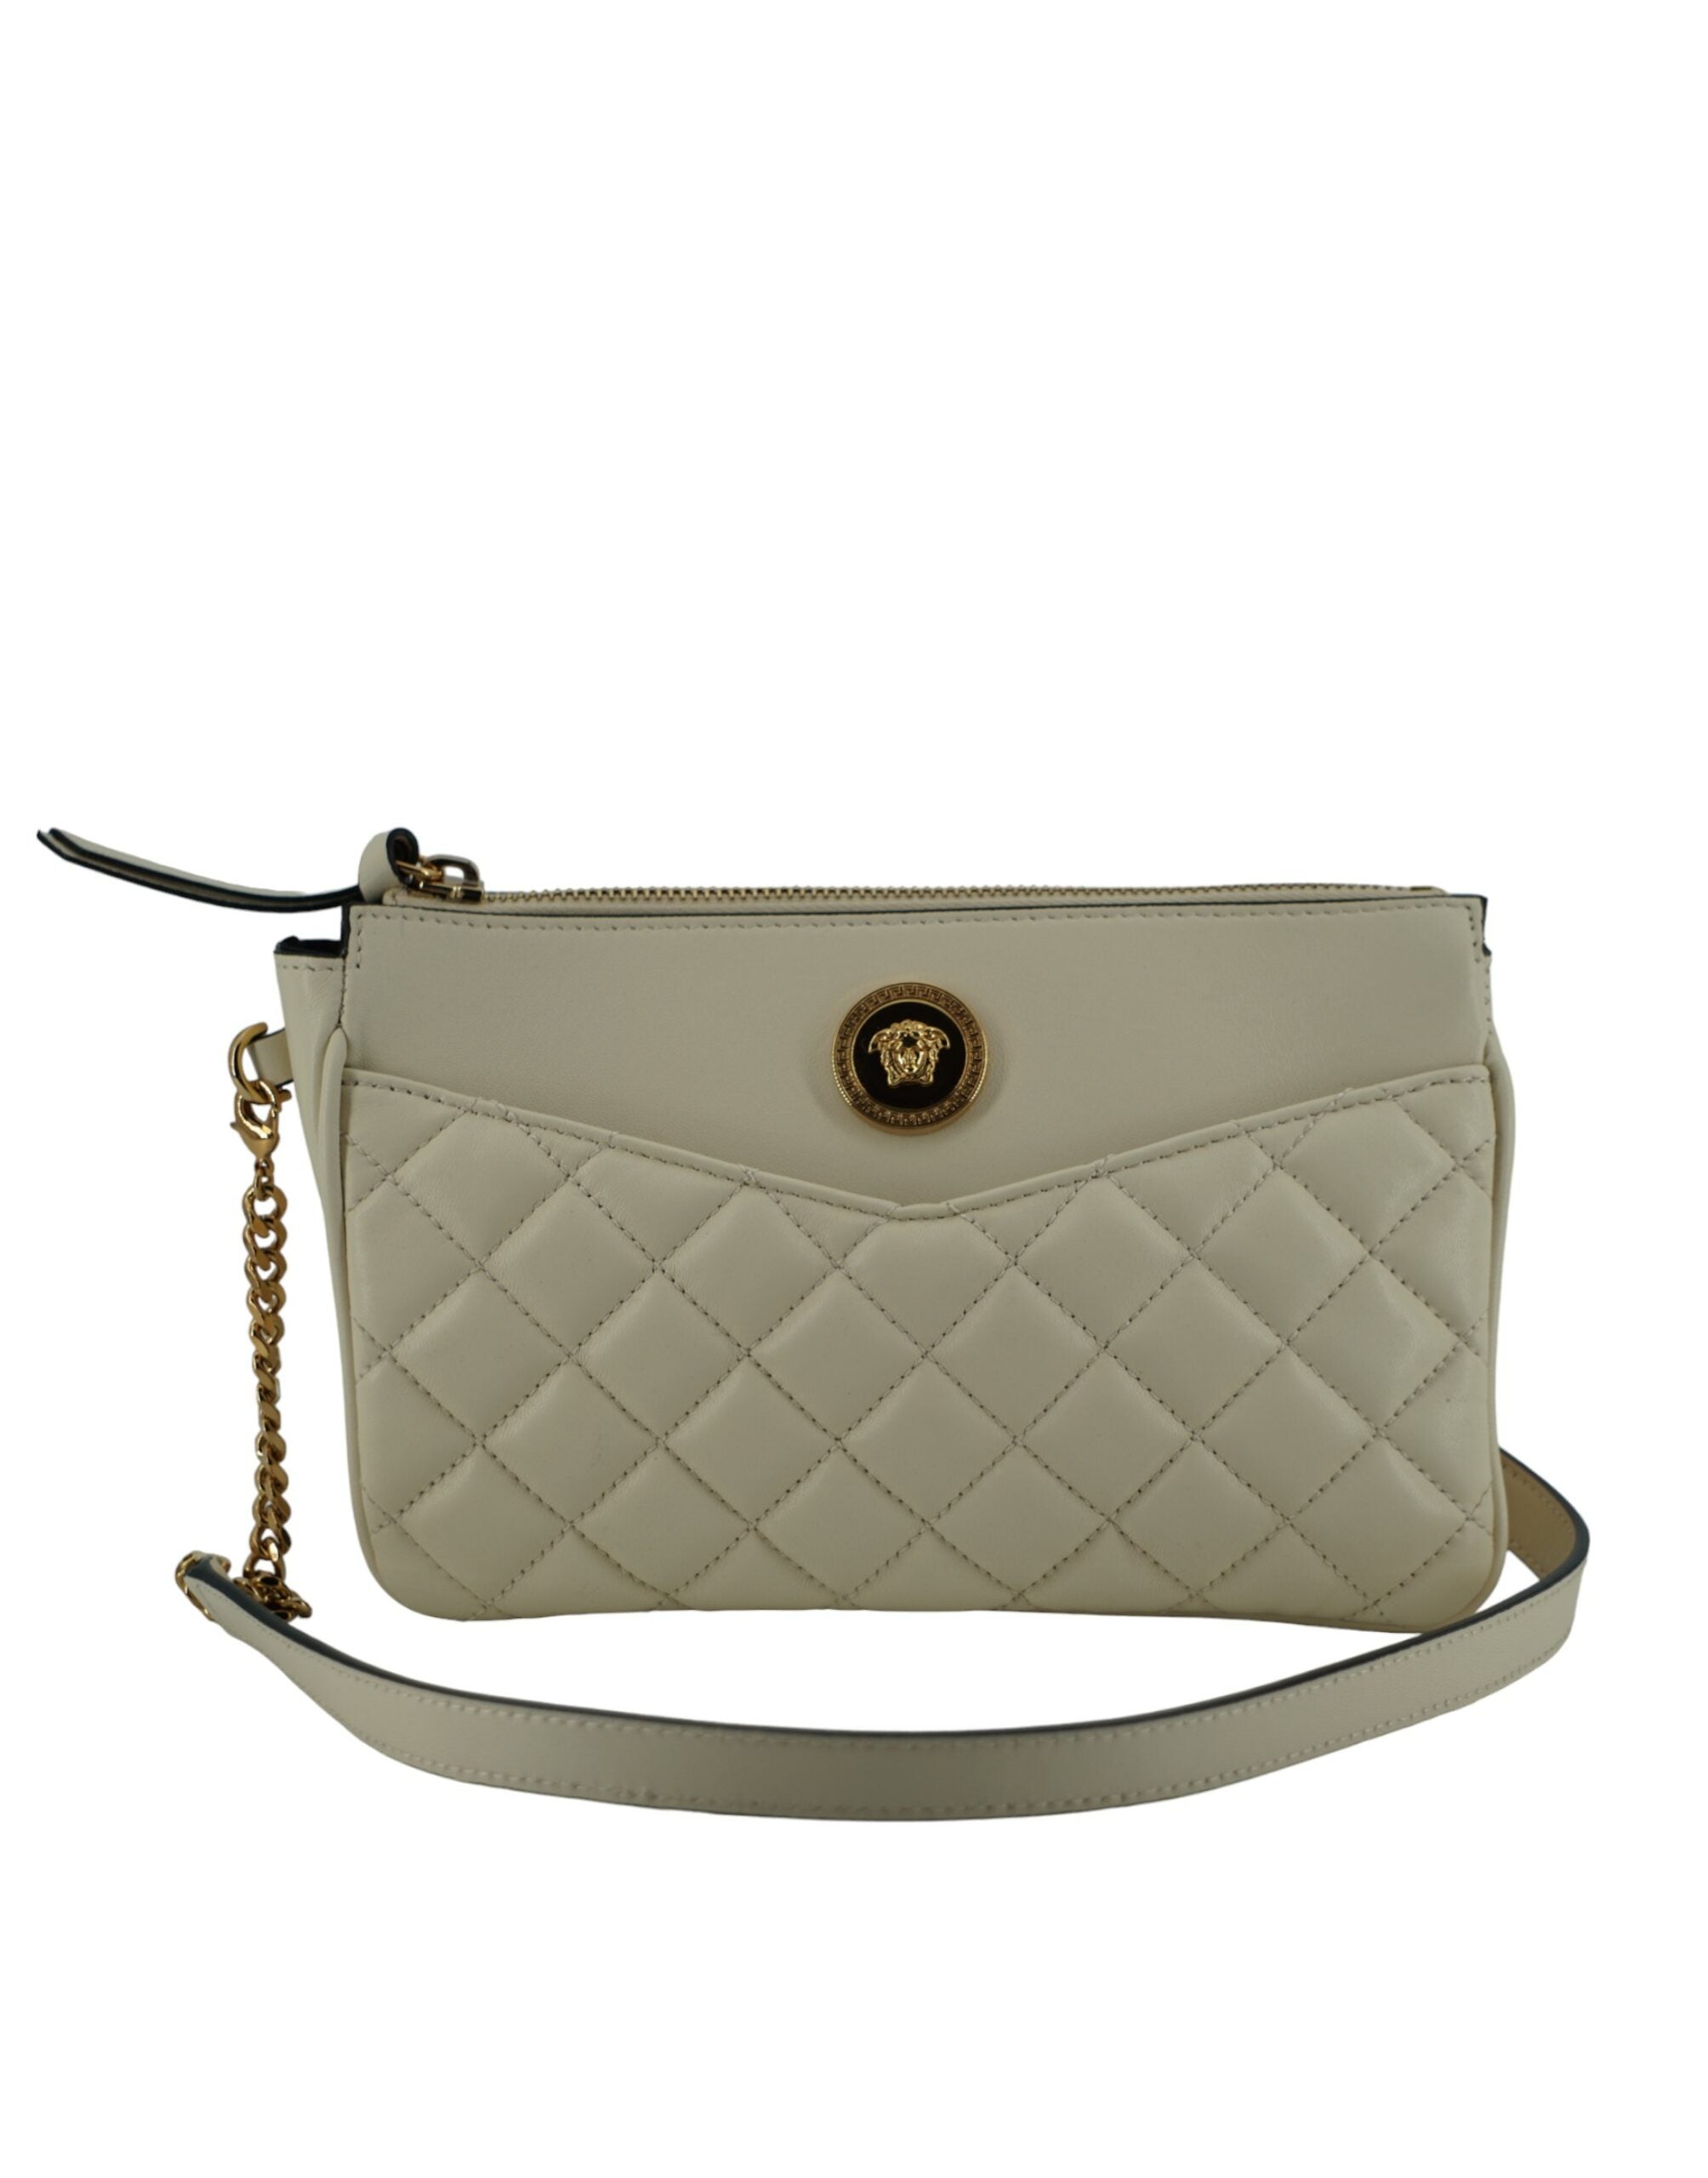 White Lamb Leather Pouch Crossbody Bag